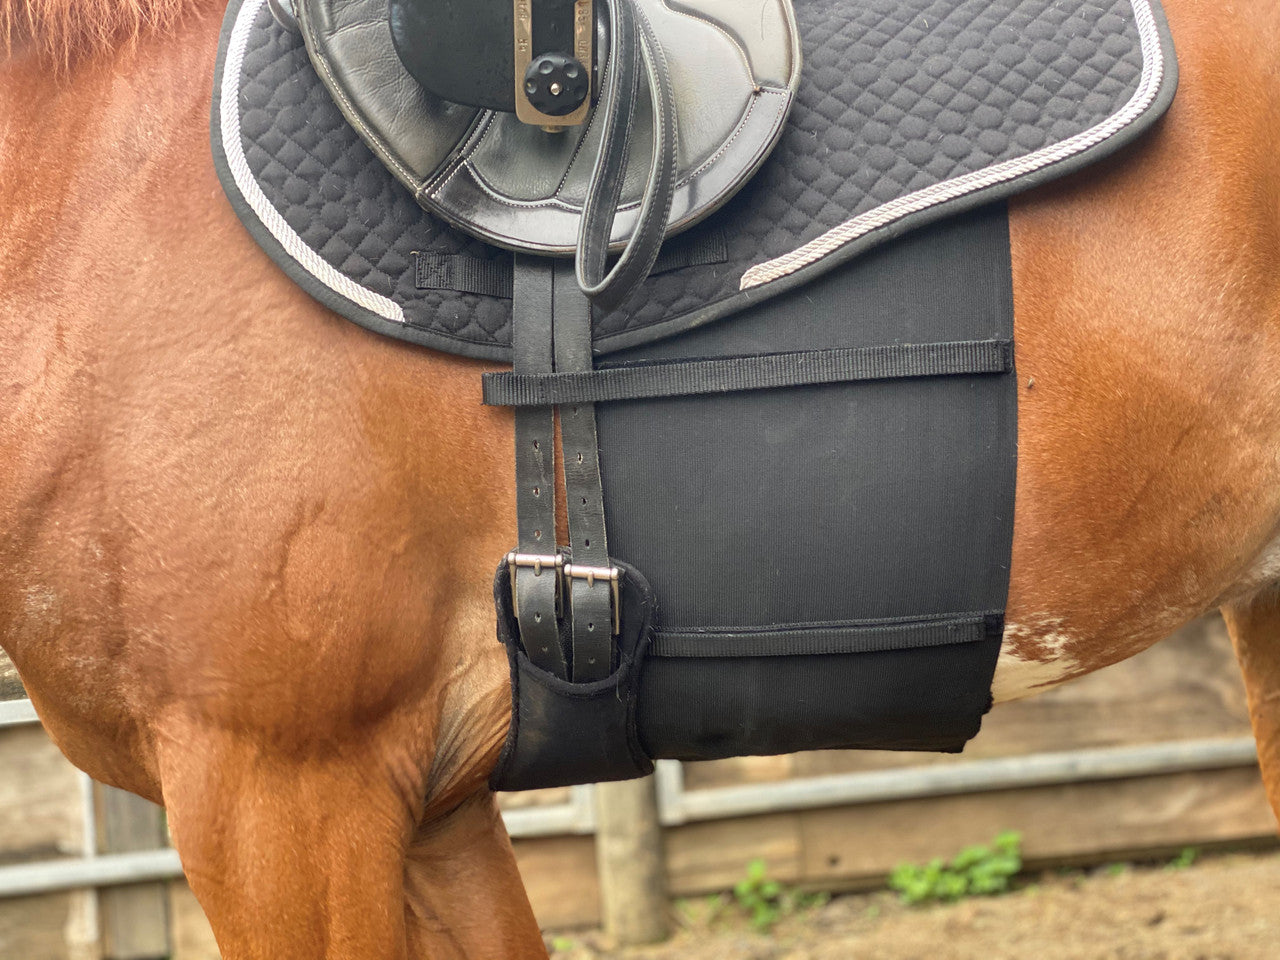 Belly Guard - Spur Guard - Fine skin horses, this will protect their sides while riding in spurs